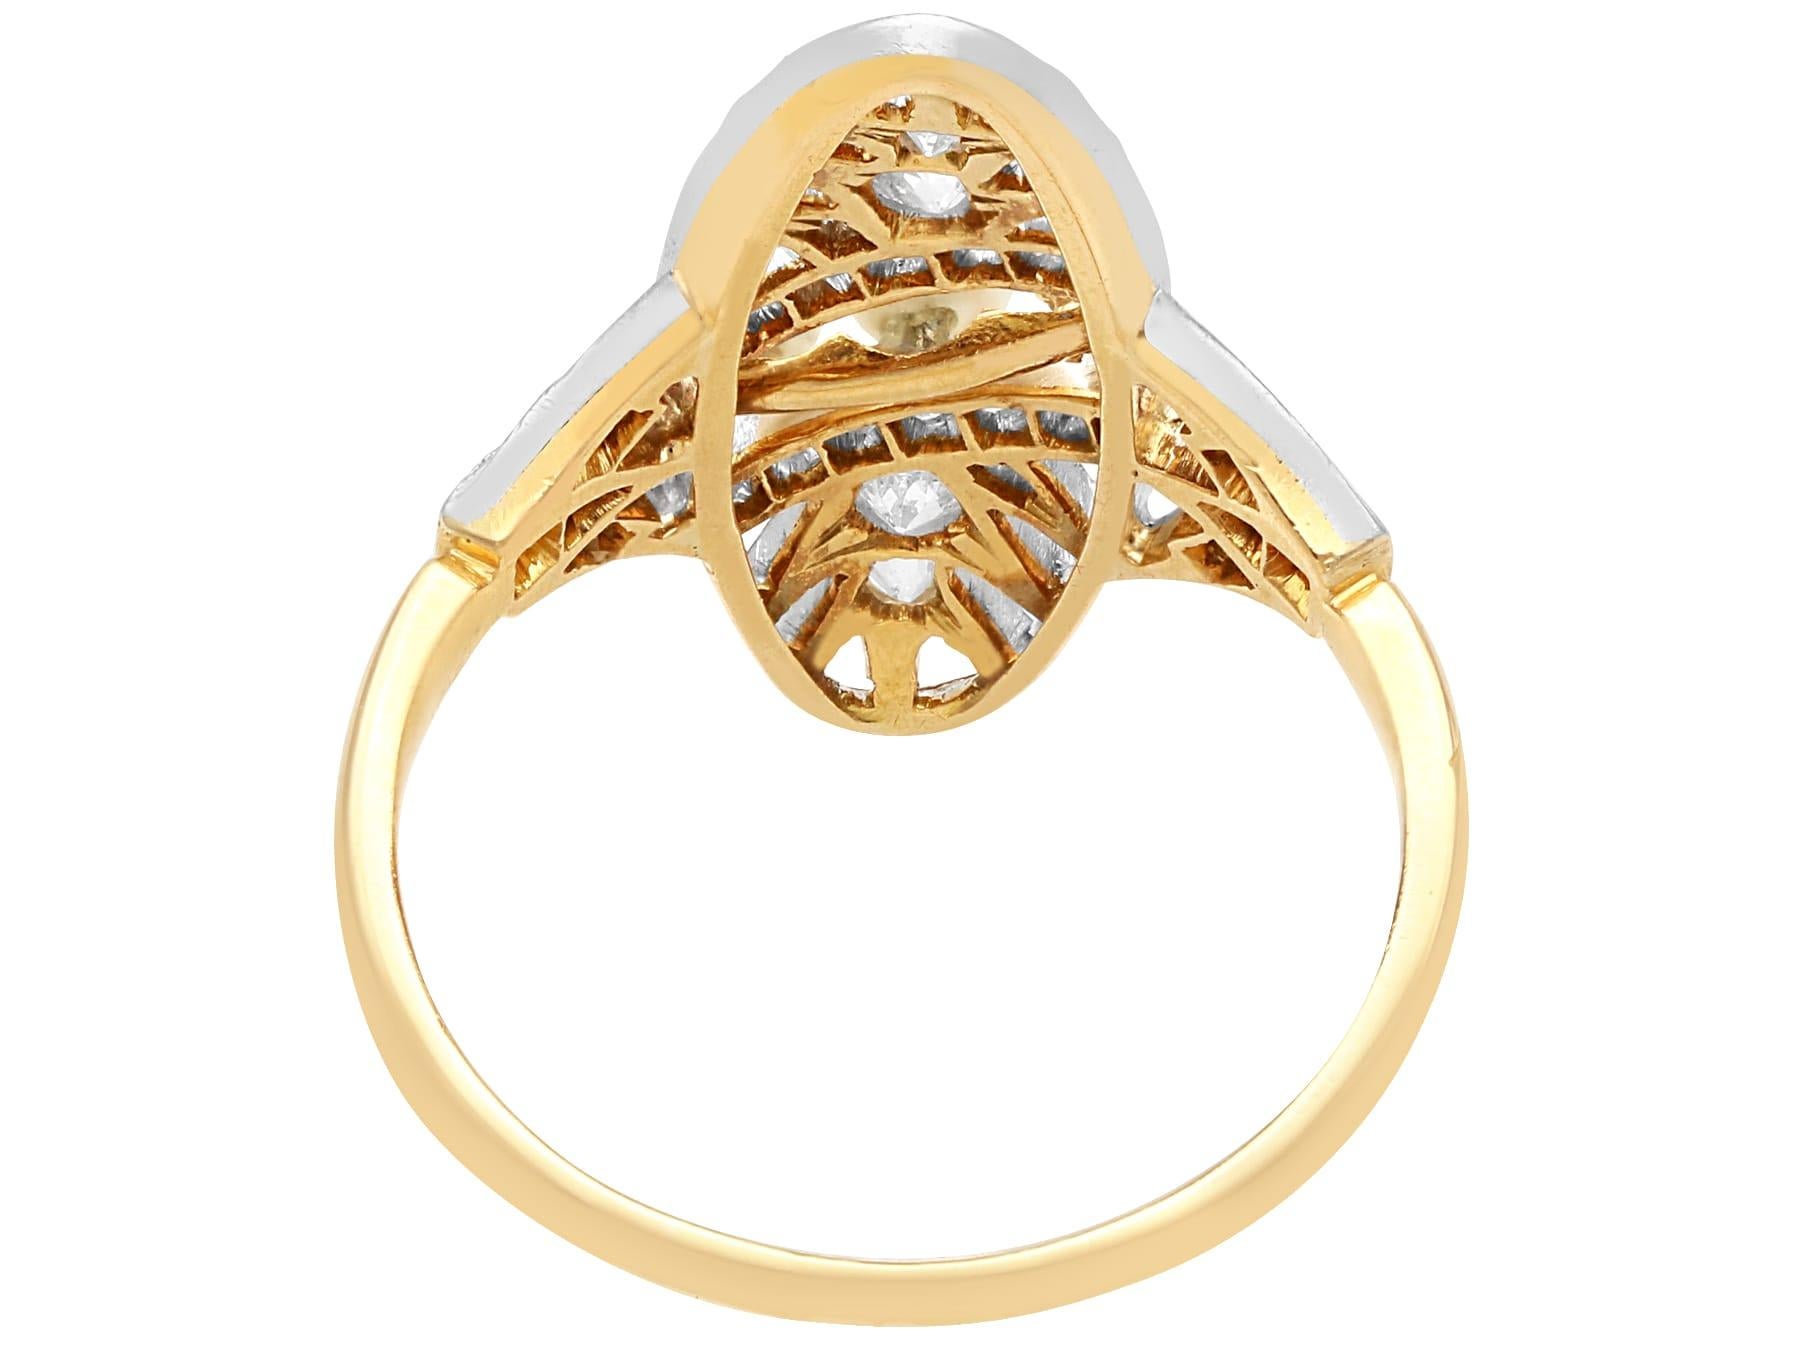 Antique French Seed Pearl and Diamond Yellow Gold Cocktail Ring In Excellent Condition For Sale In Jesmond, Newcastle Upon Tyne